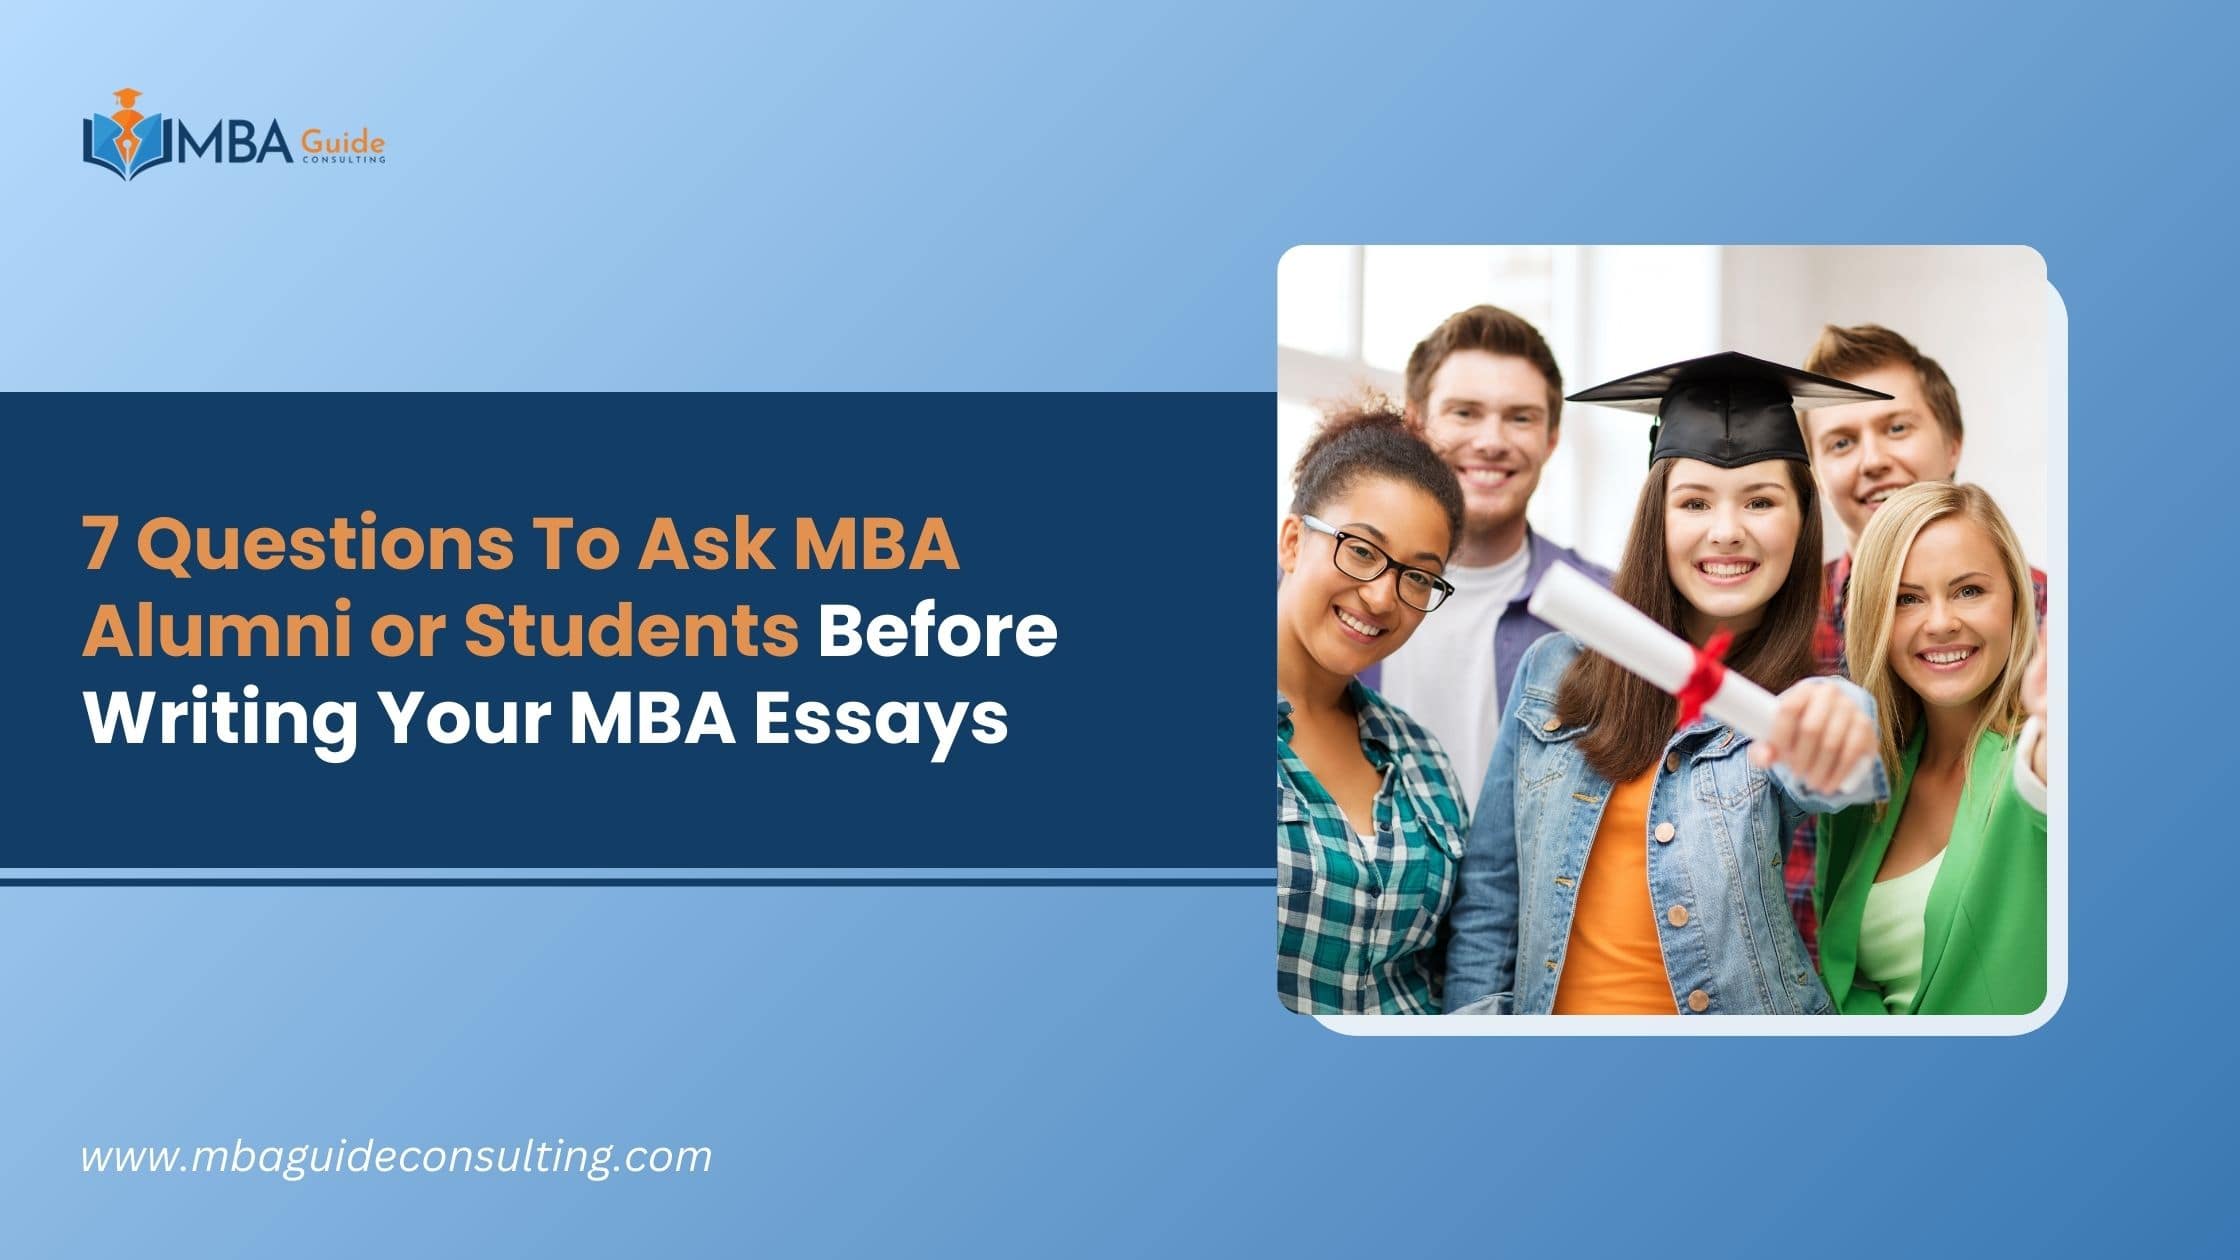 7 Questions You Should Ask MBA Alumni and Students Before Writing Your MBA Essays